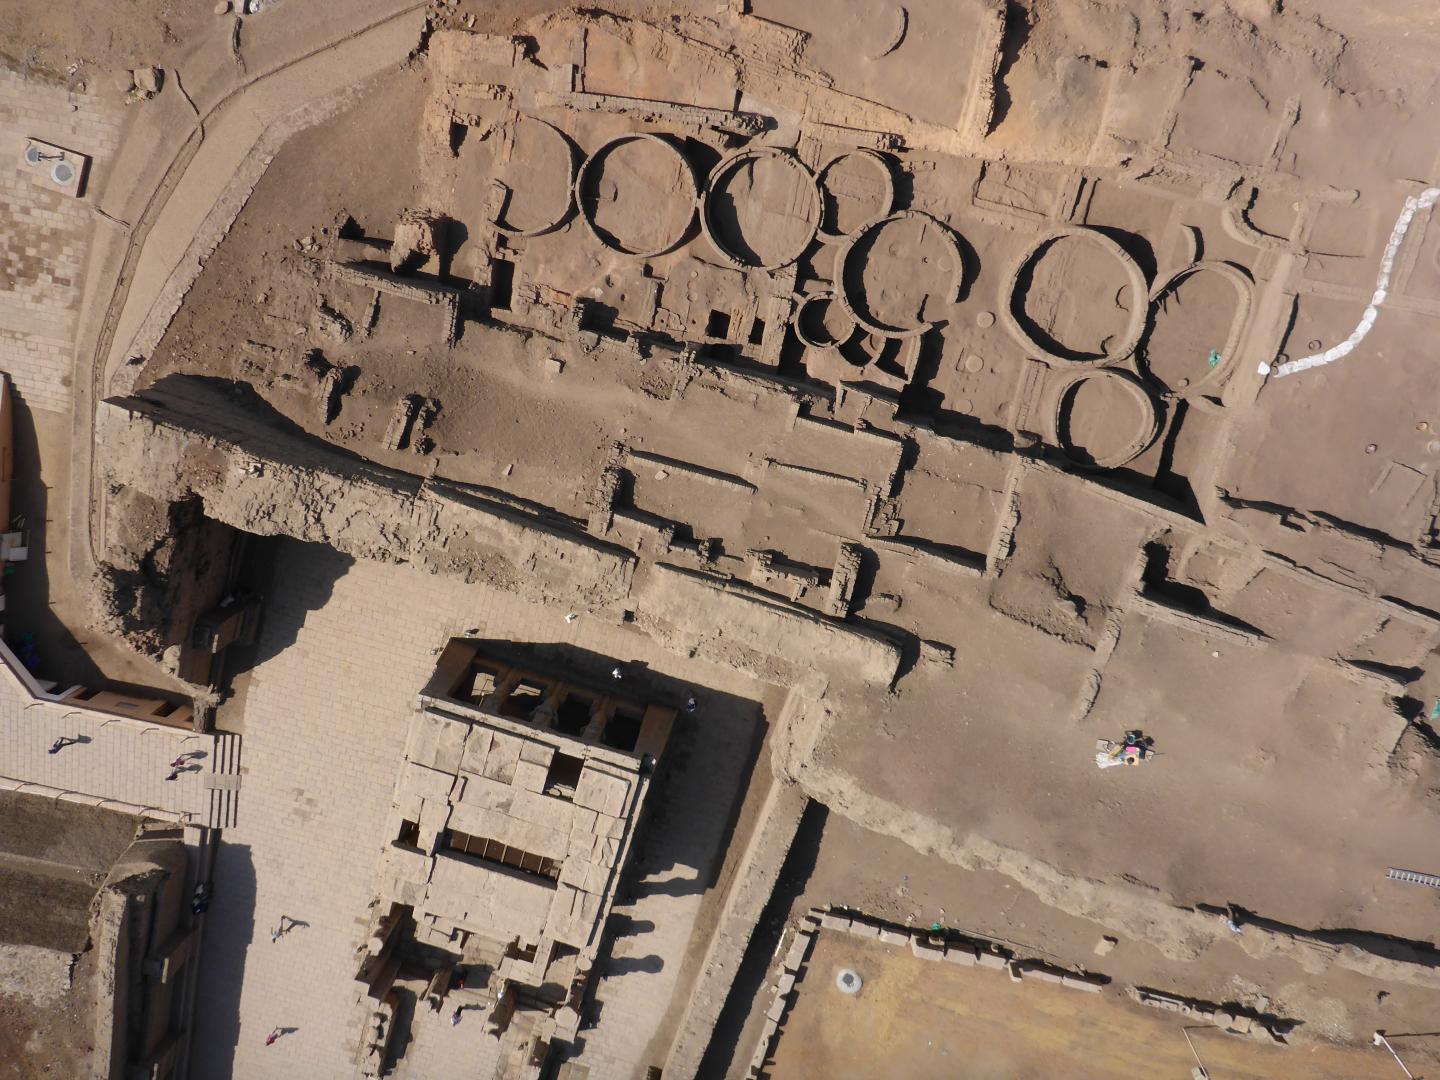 Archaeologists Study Rise of Urban Civilization in Ancient Egypt